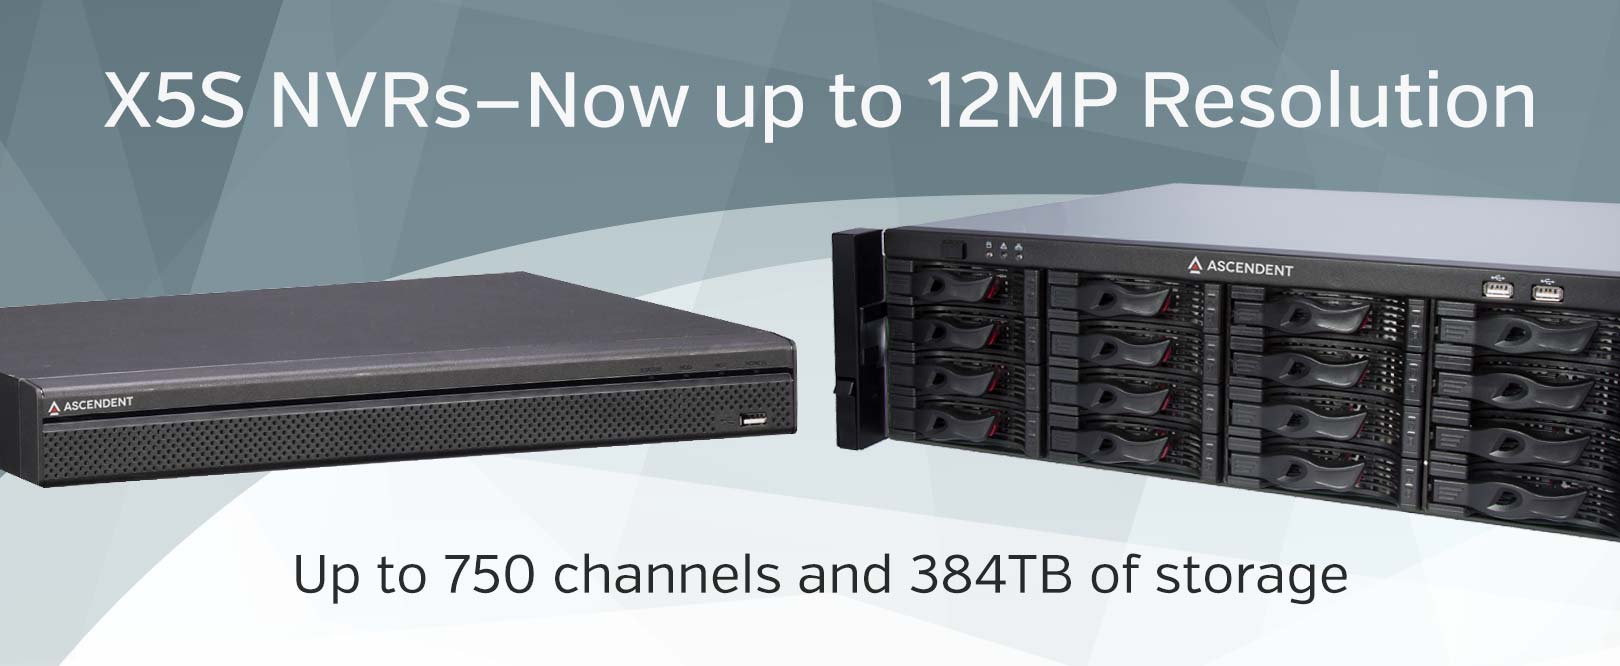 X5S NVRs Now with 12MP Resolution, up to 750 channels and 384TB of storage